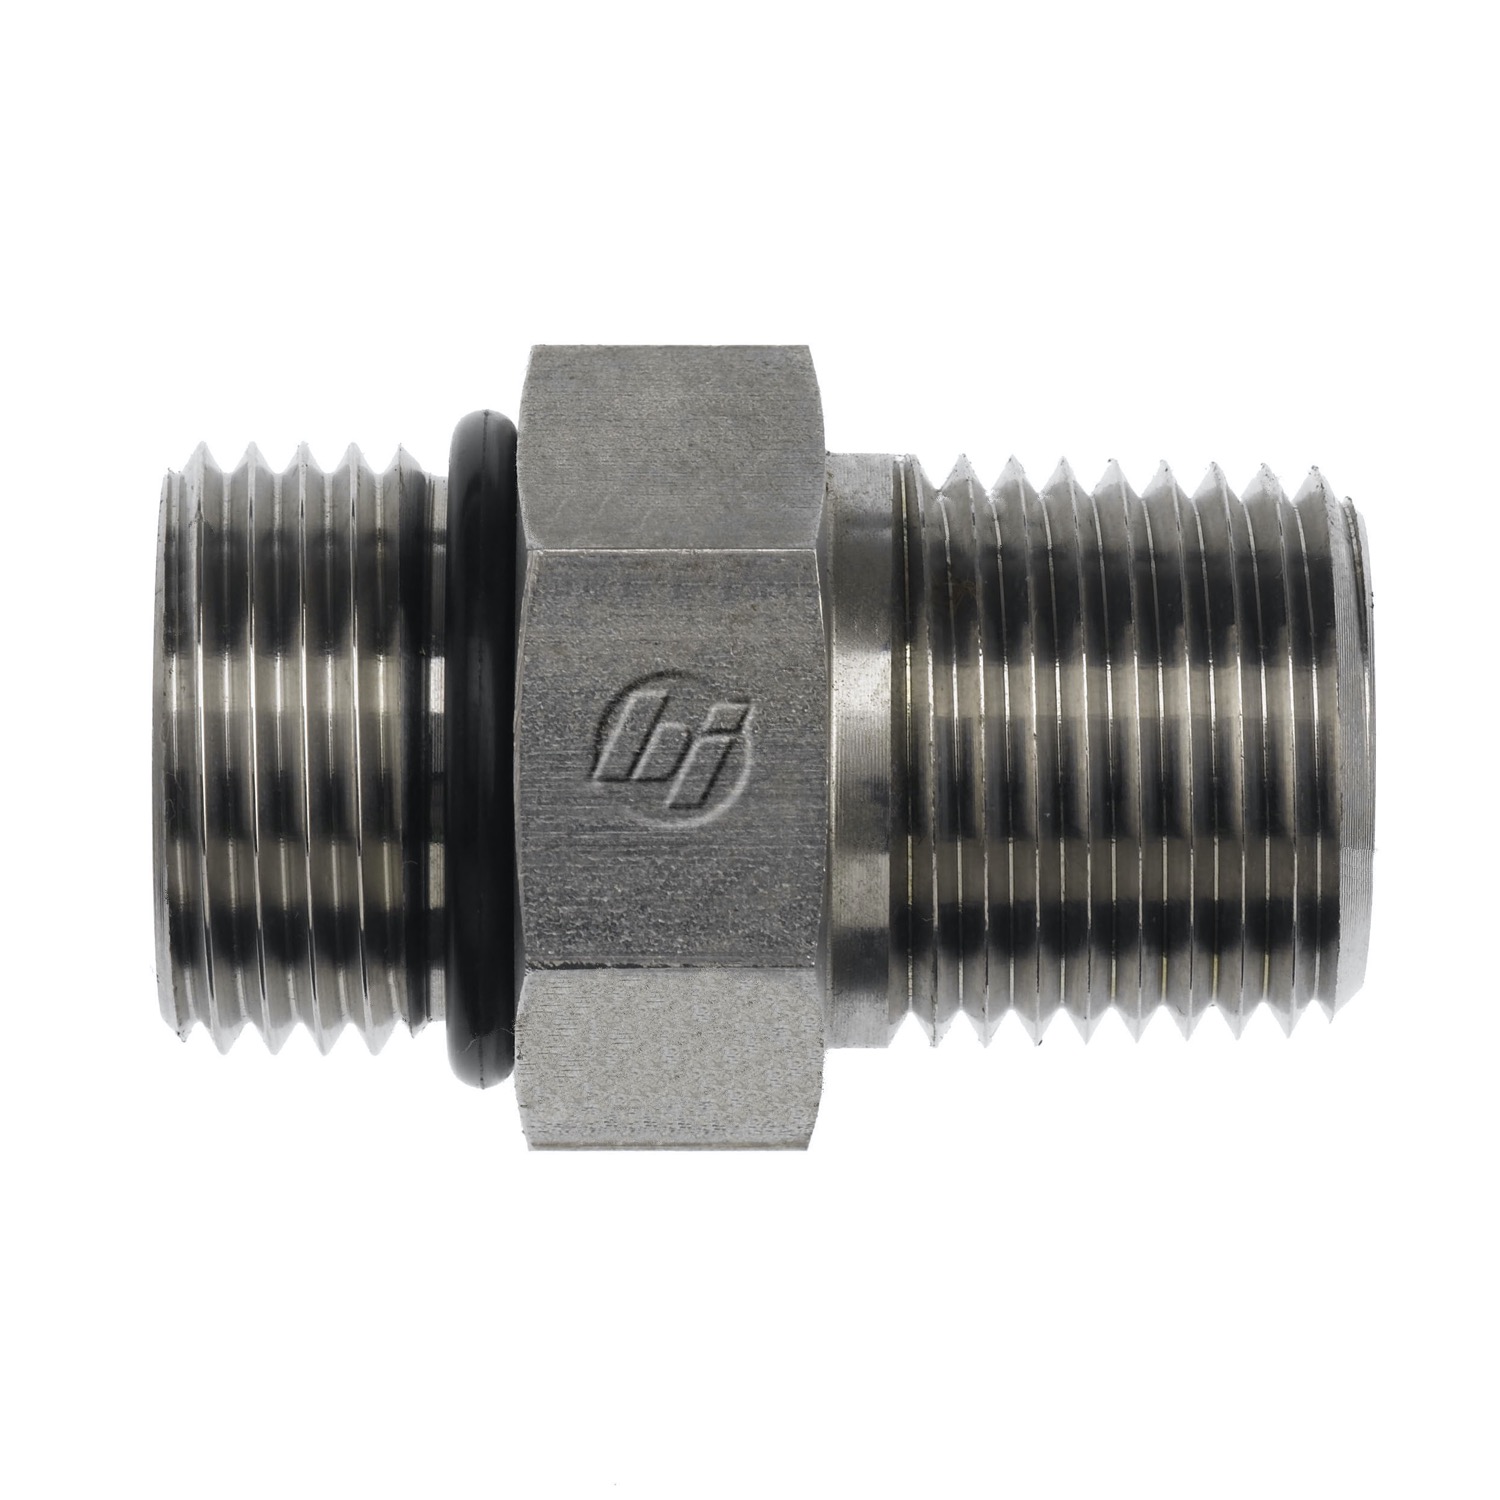 Hydraulic Hose Adapters - Straight Fitting, O-Ring Boss to NPTF, 6401 Series 6401-10-08-O